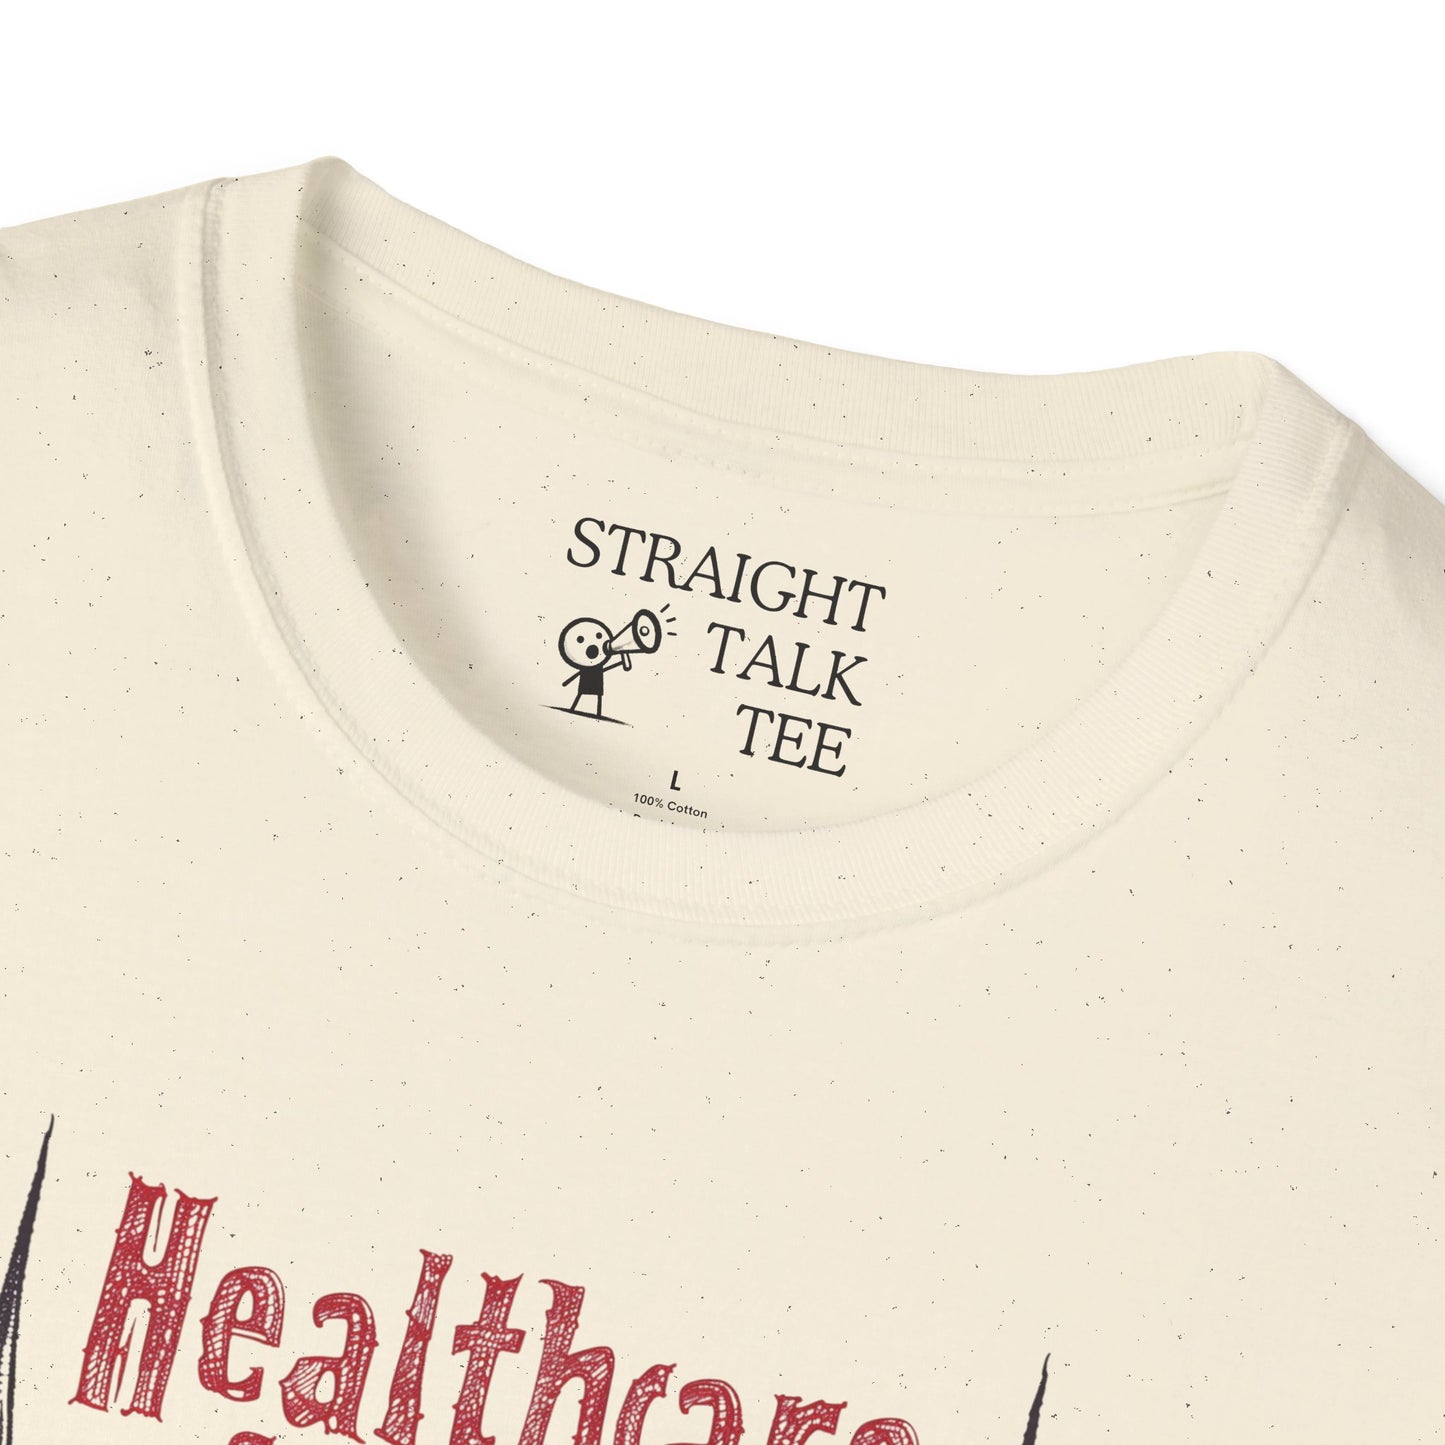 Healthcare for All shirt Political t-shirt Punk Style Activist tshirt Bold Skull Tee Statement Leftist Liberal shirt Protest Vote tshirt